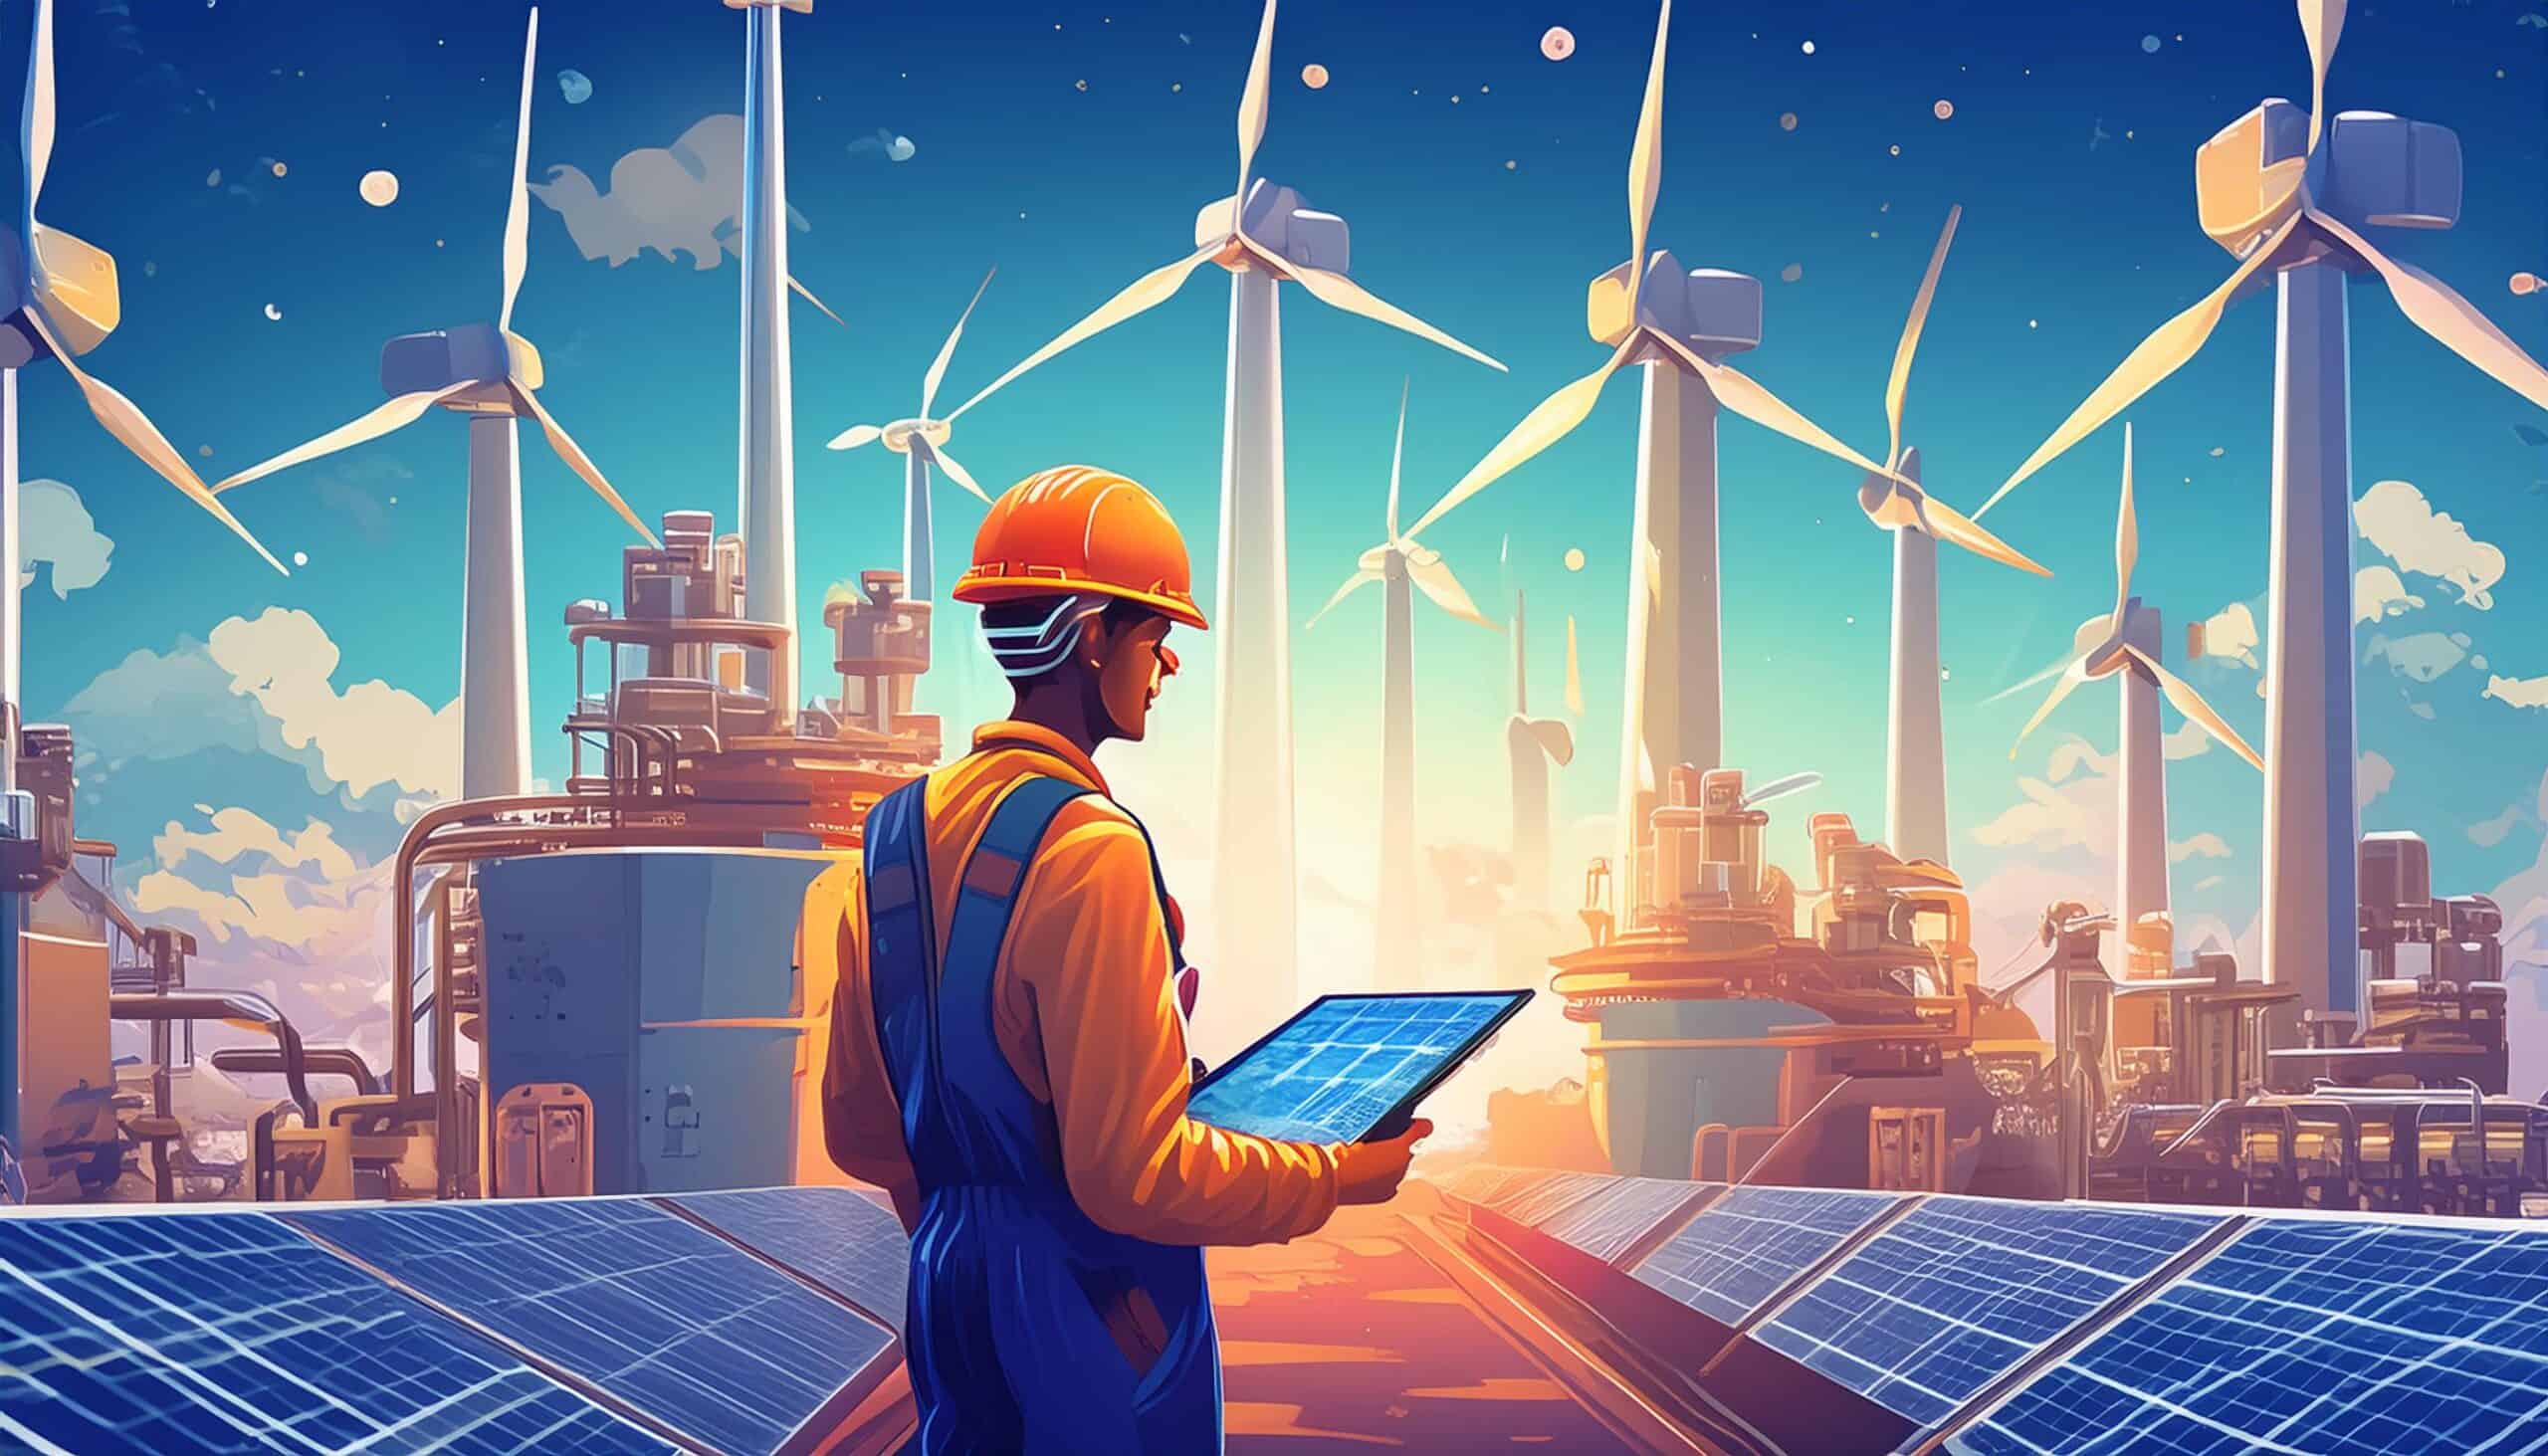 An illustration of a manufacturing facility with energy-efficient machinery in operation, illuminated by bright lights powered by visible solar panels on the roof. A technician monitors the equipment using a tablet, ensuring optimal performance. The background includes wind turbines, symbolizing the use of renewable energy sources. The scene conveys reduced energy consumption, lower utility bills, and a commitment to environmental sustainability.